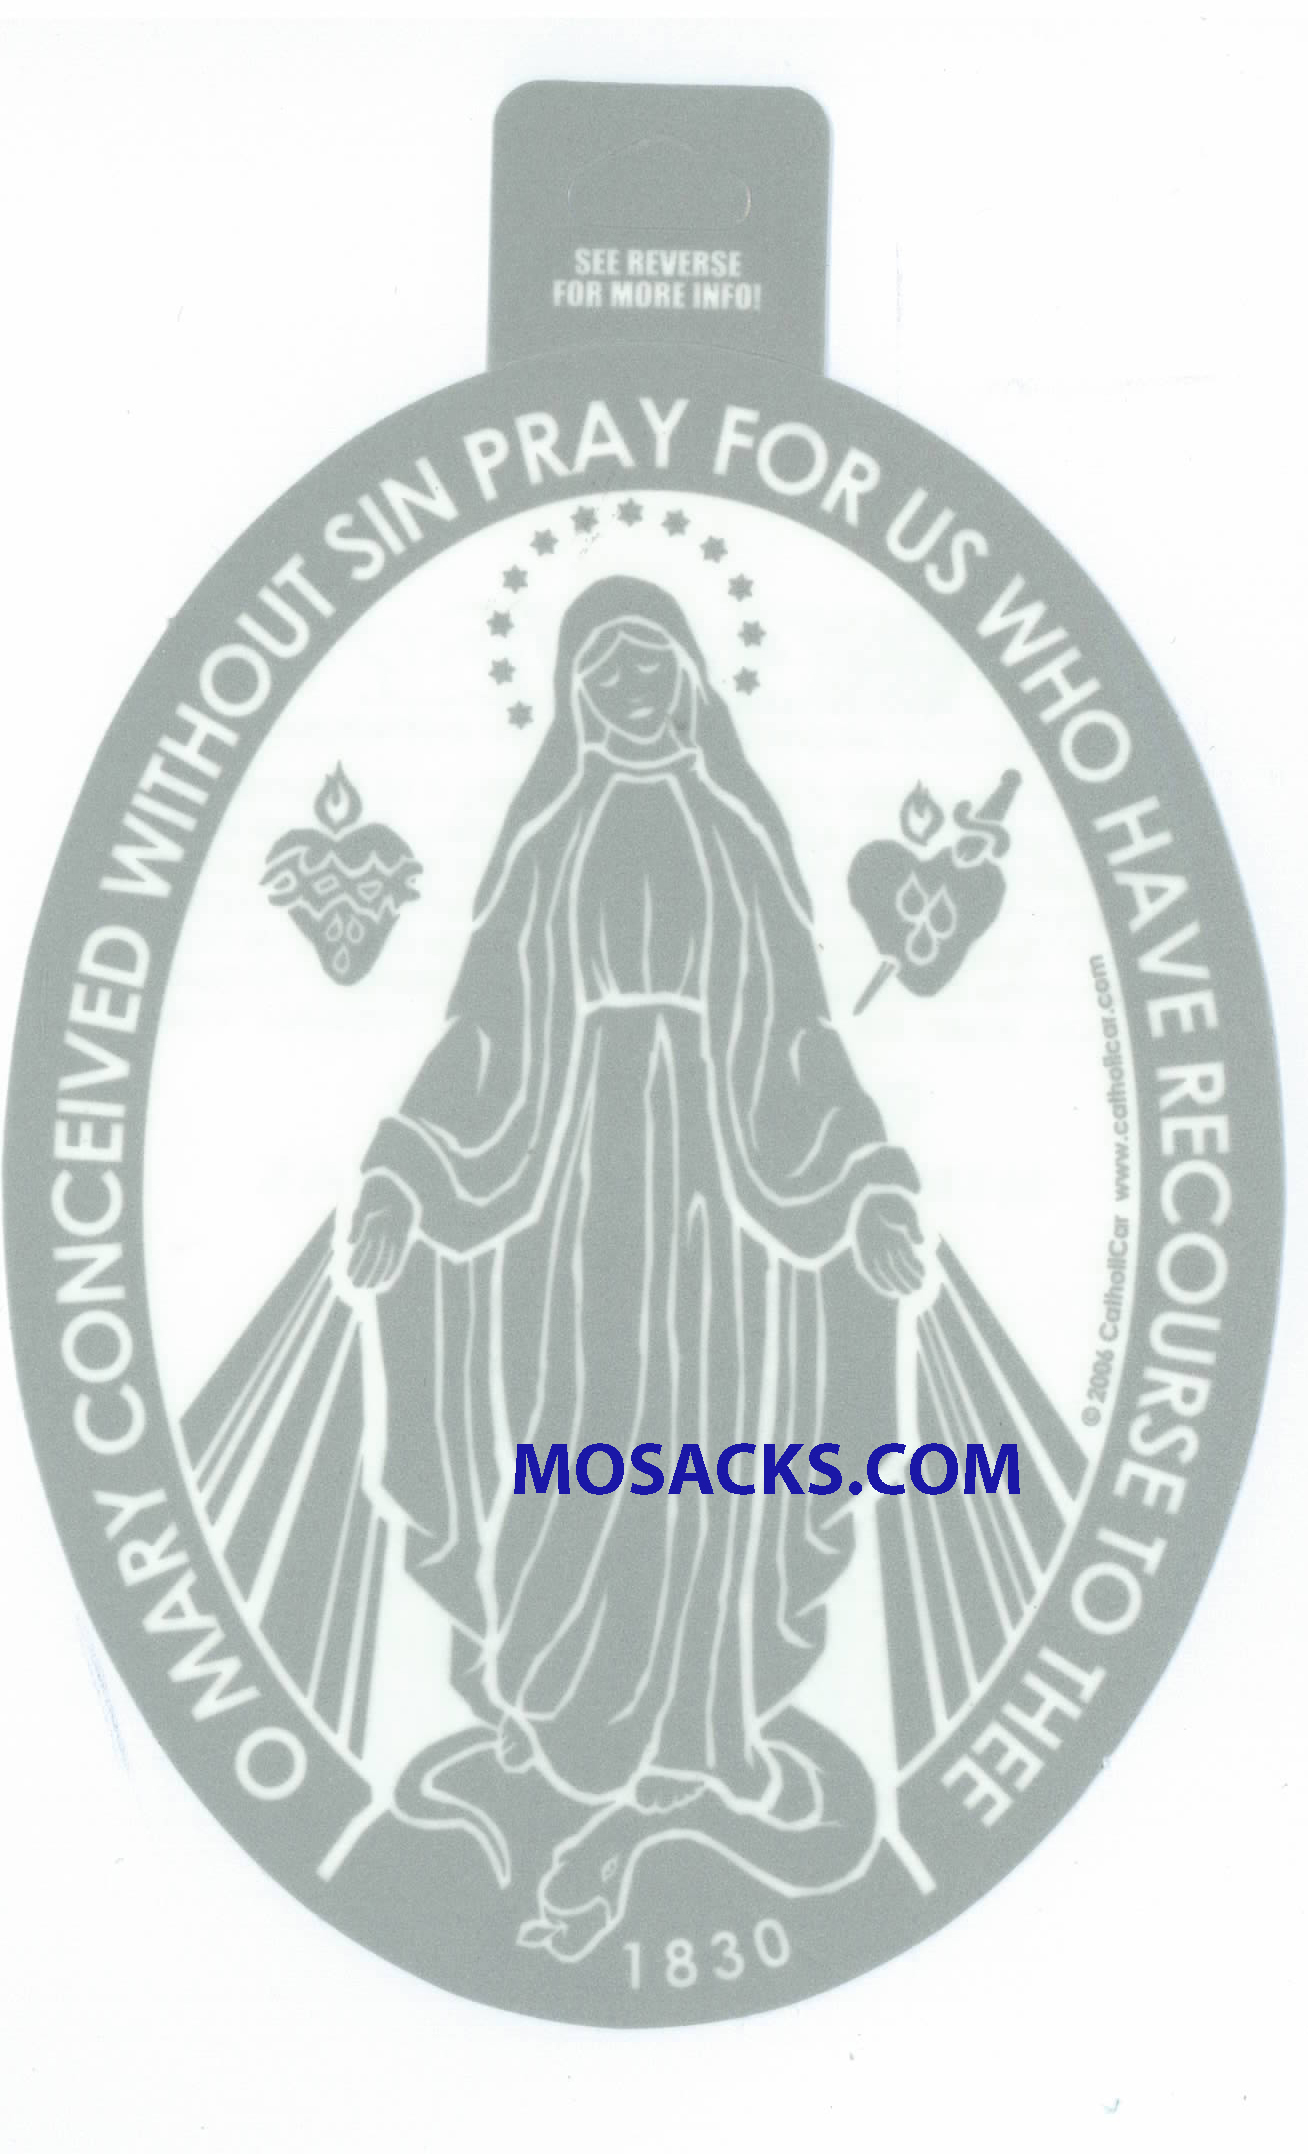 Miraculous Medal Oval Decal Christian Window Decal, Catholic Window Decal